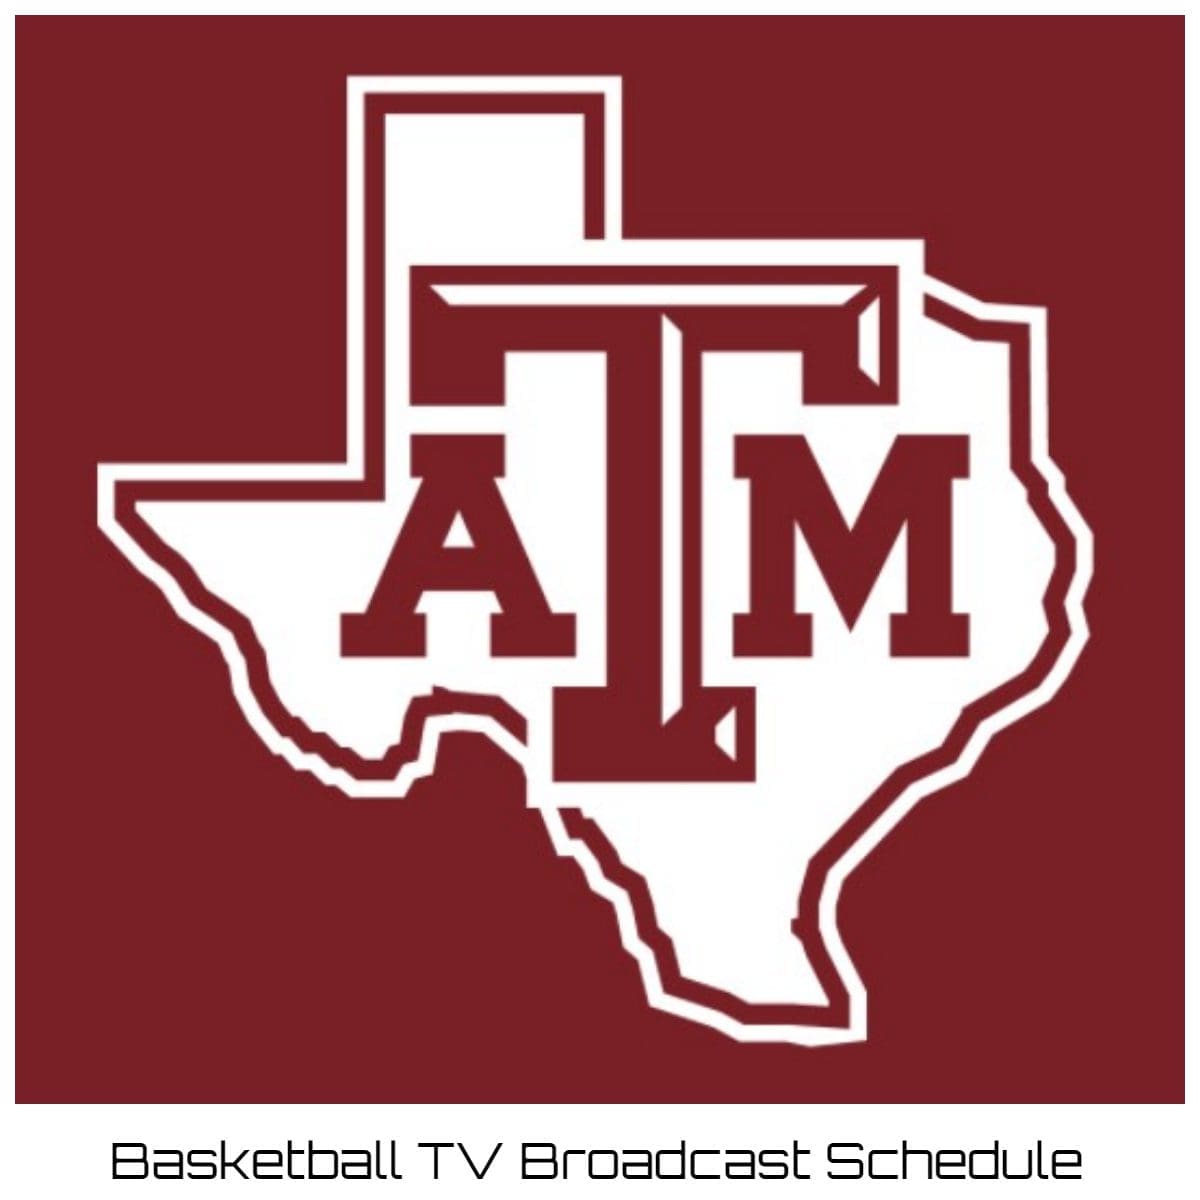 Texas A&M Aggies Basketball TV Broadcast Schedule